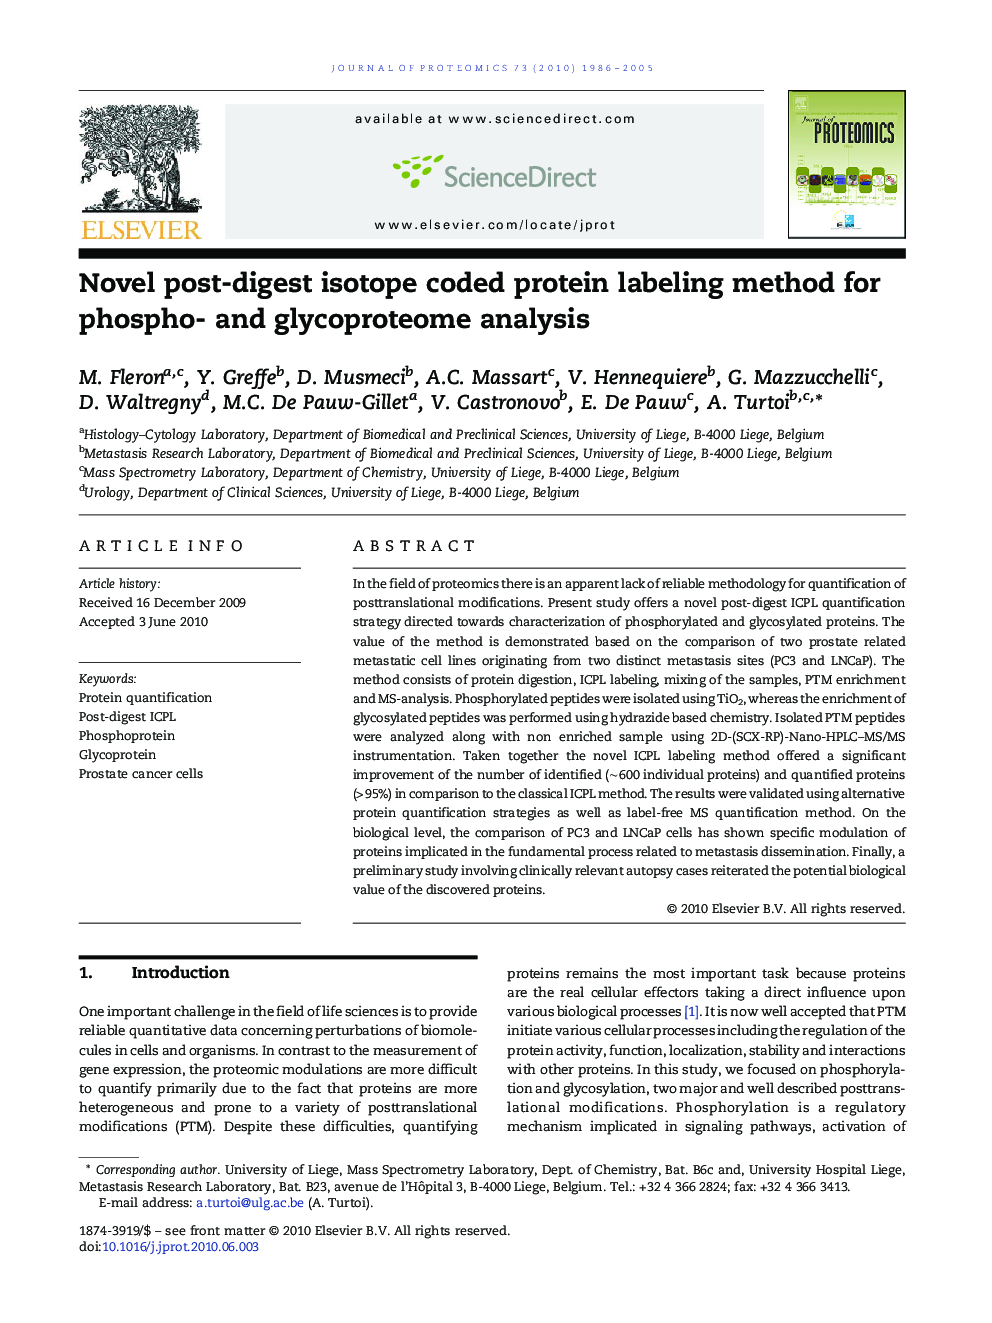 Novel post-digest isotope coded protein labeling method for phospho- and glycoproteome analysis